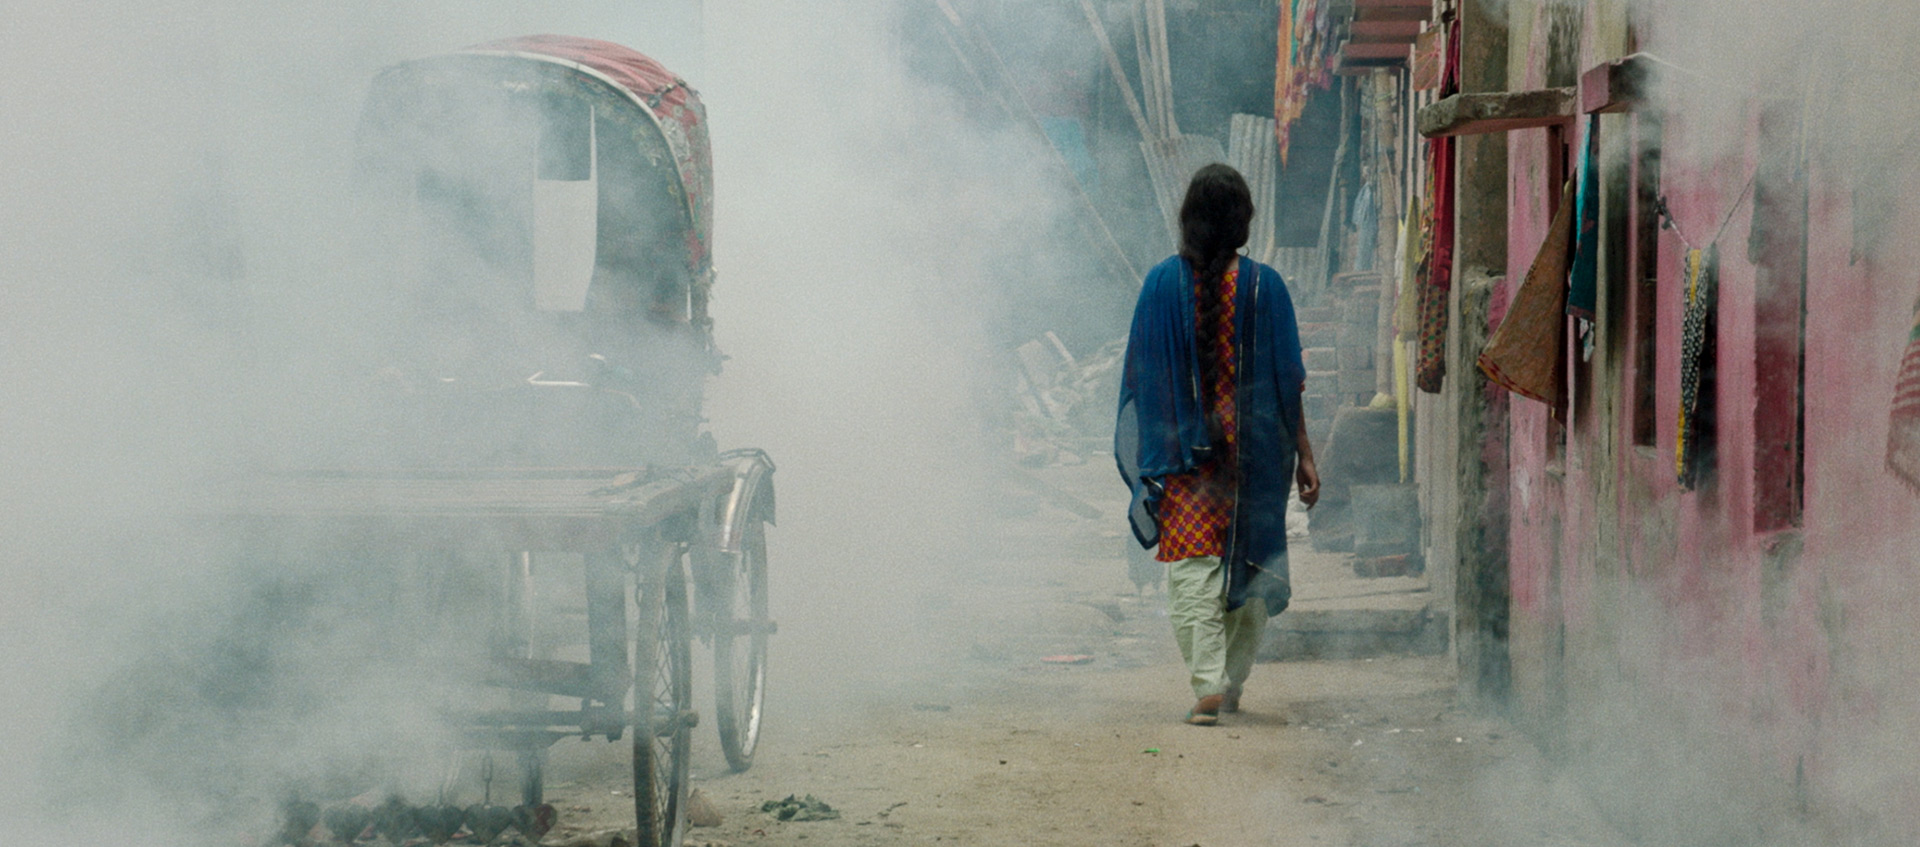 A woman walks away from the camera down a smoky street